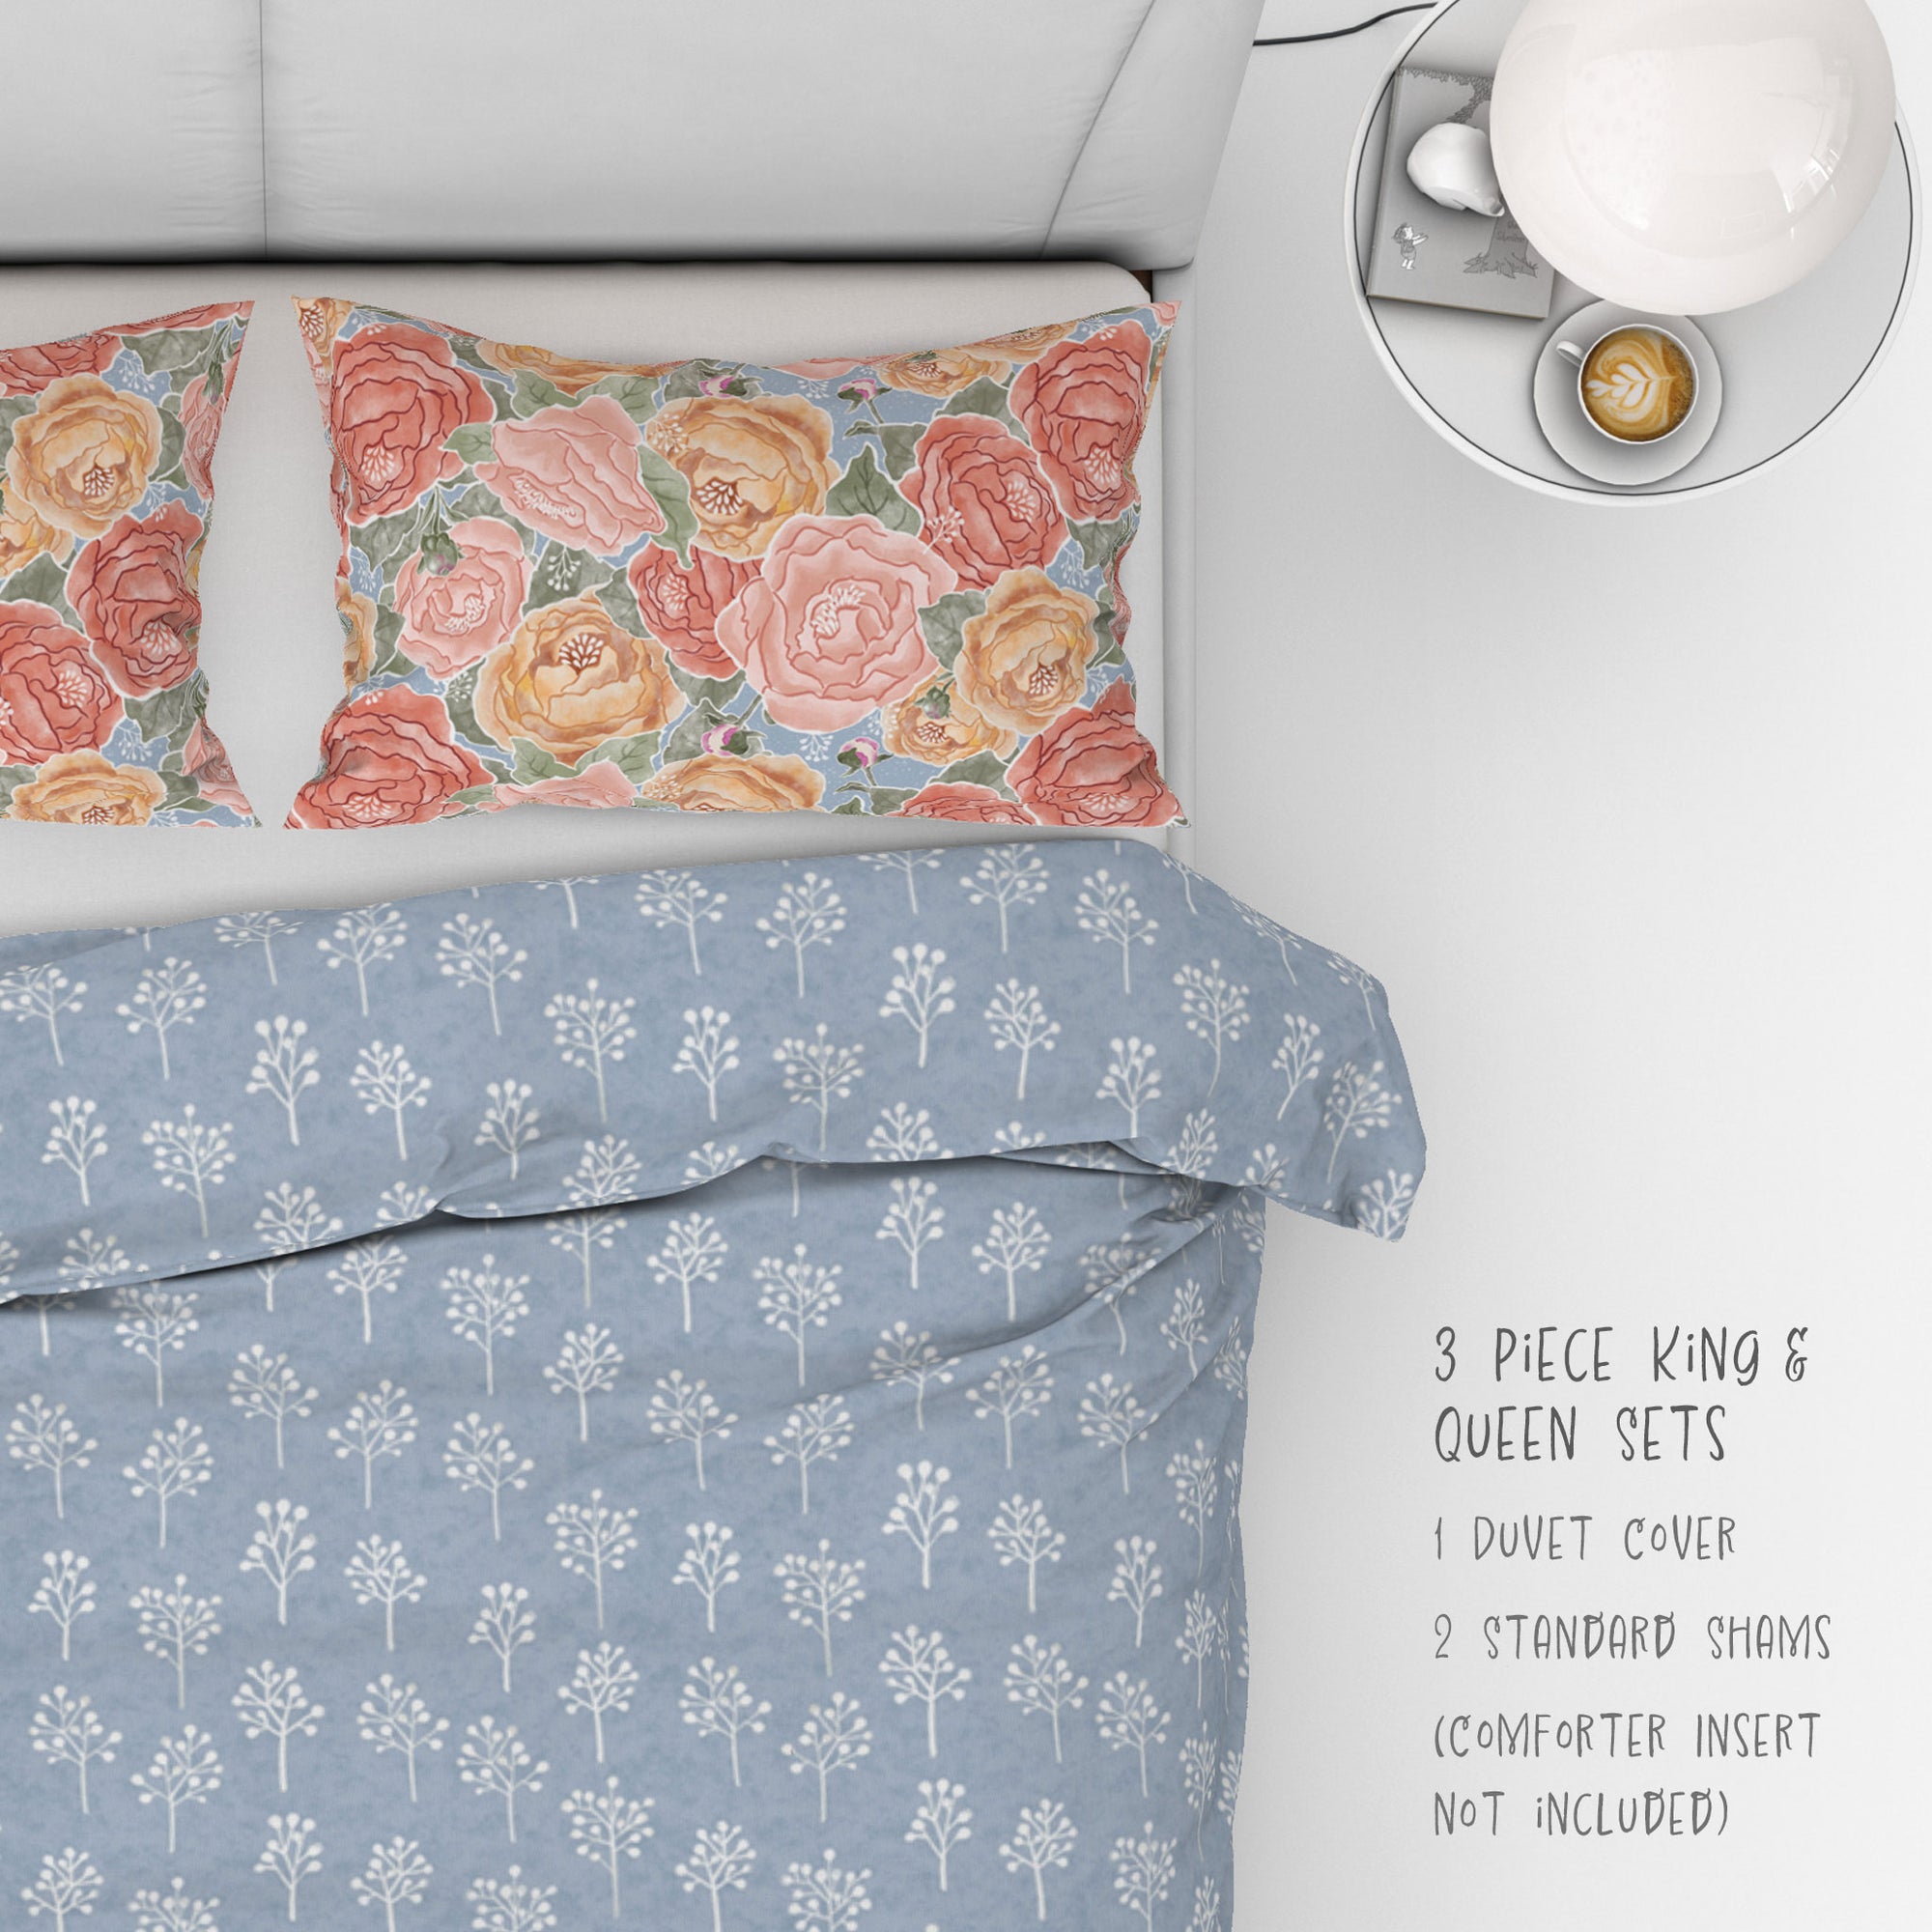 3 Piece Set for Queen & King sizes - Pretty In Peony Baby’s Breath Blue comes with Duvet cover and two Shams